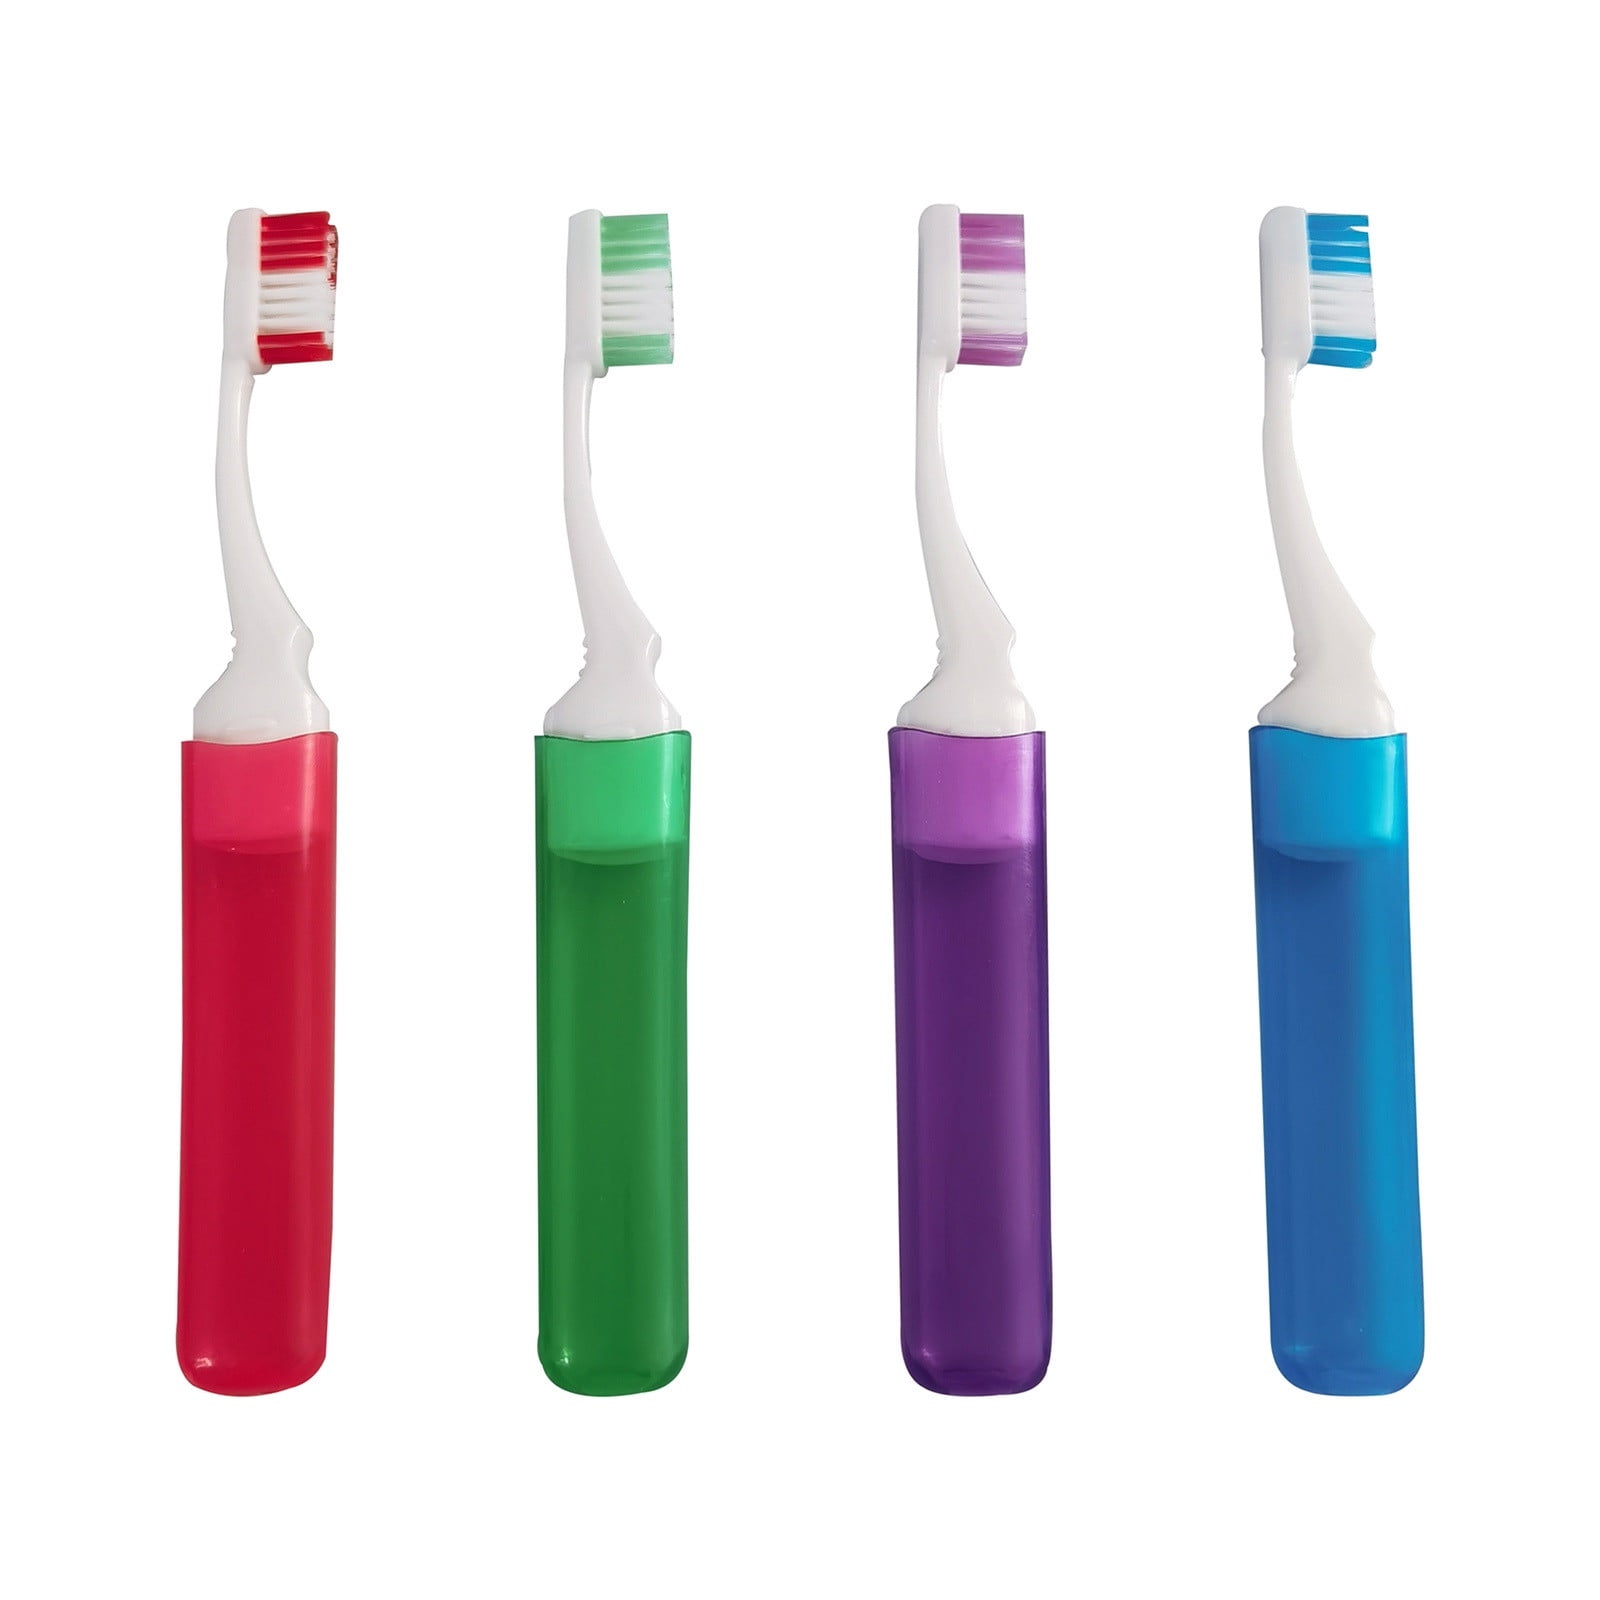 10/20Pcs Travel Toothbrushes Fold Up Foldable Toothbrush Holiday Random Colors 